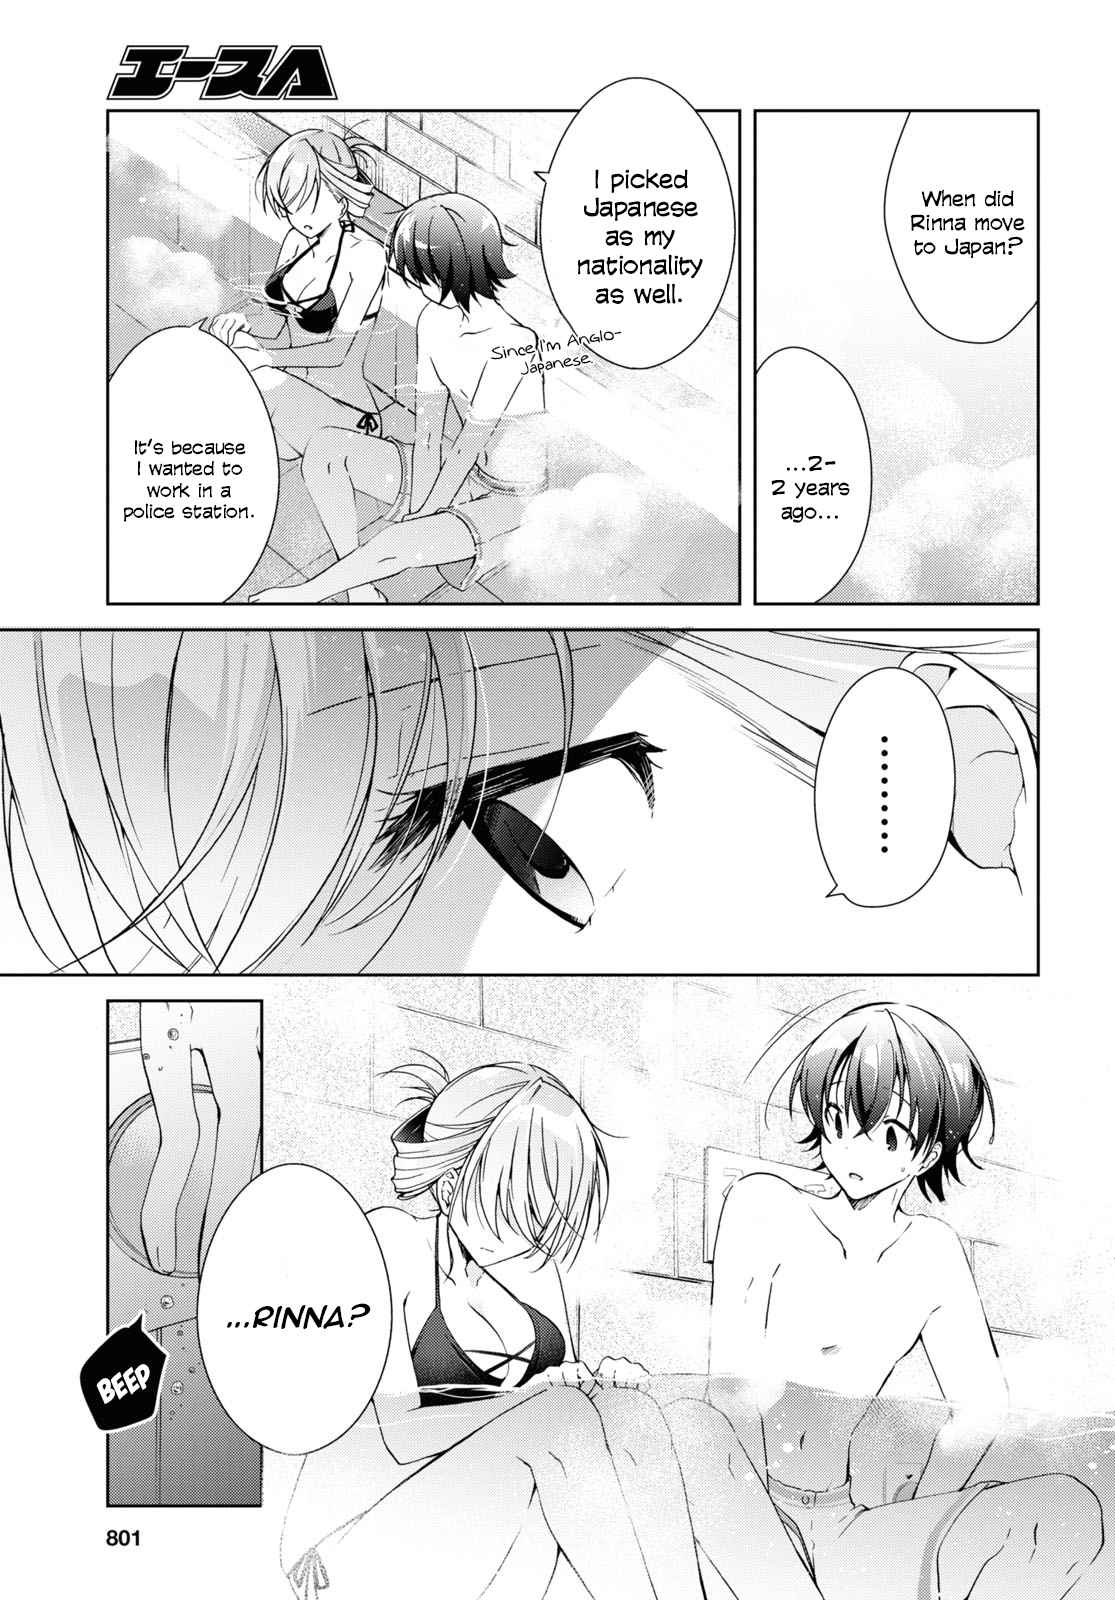 Isshiki-san Wants to Know About Love. - chapter 11 - #5